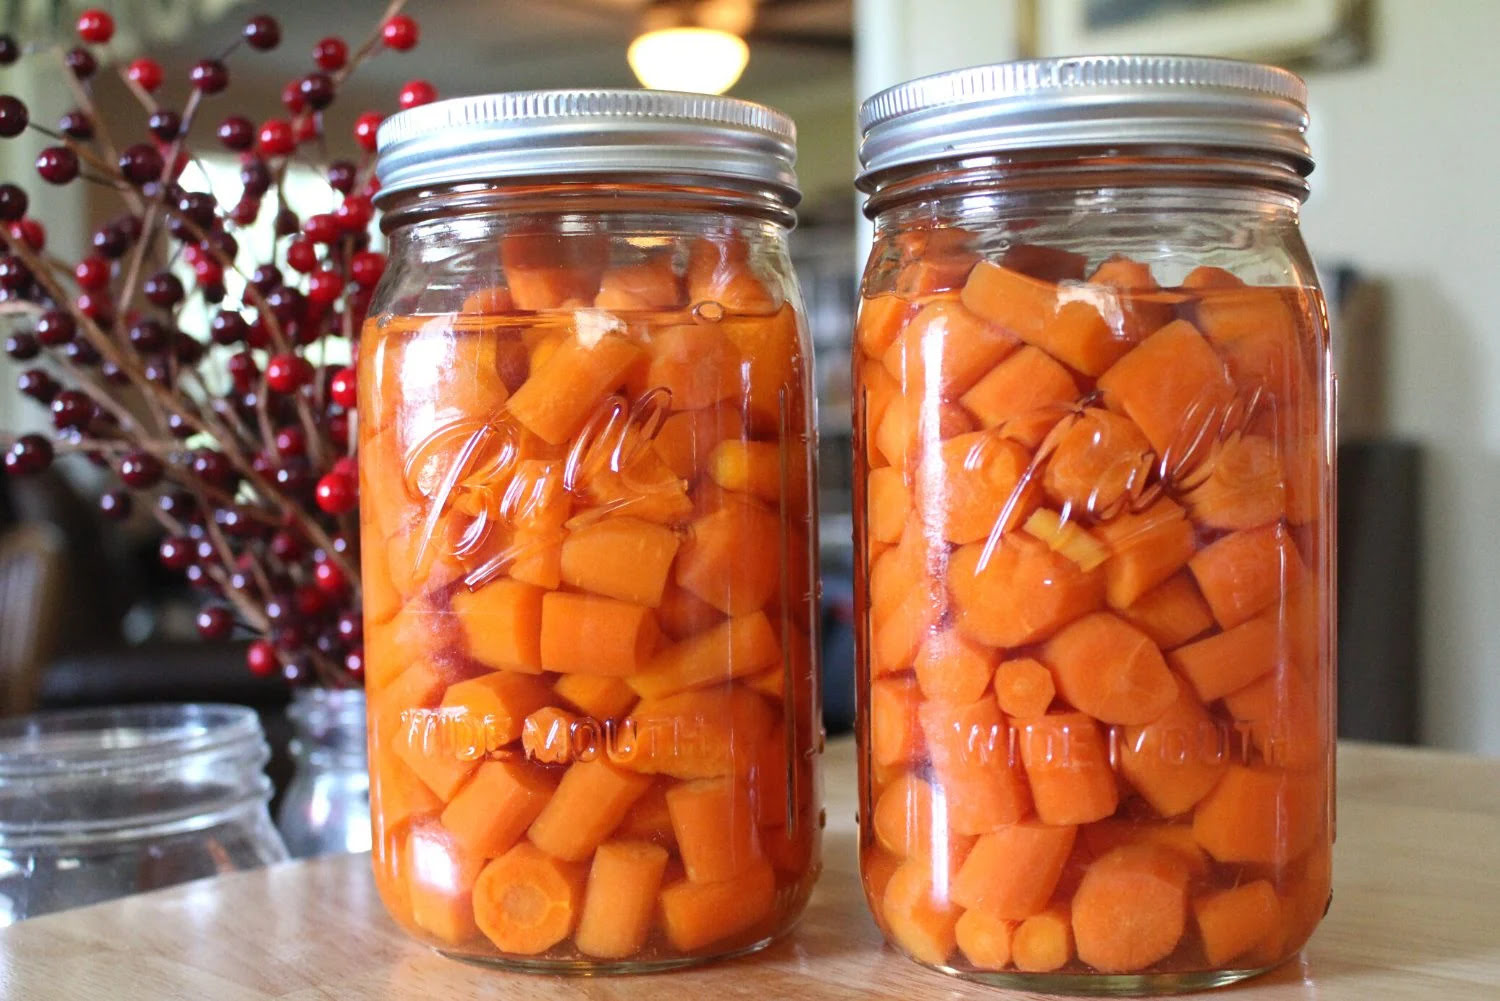 How To Store Carrots In Mason Jars